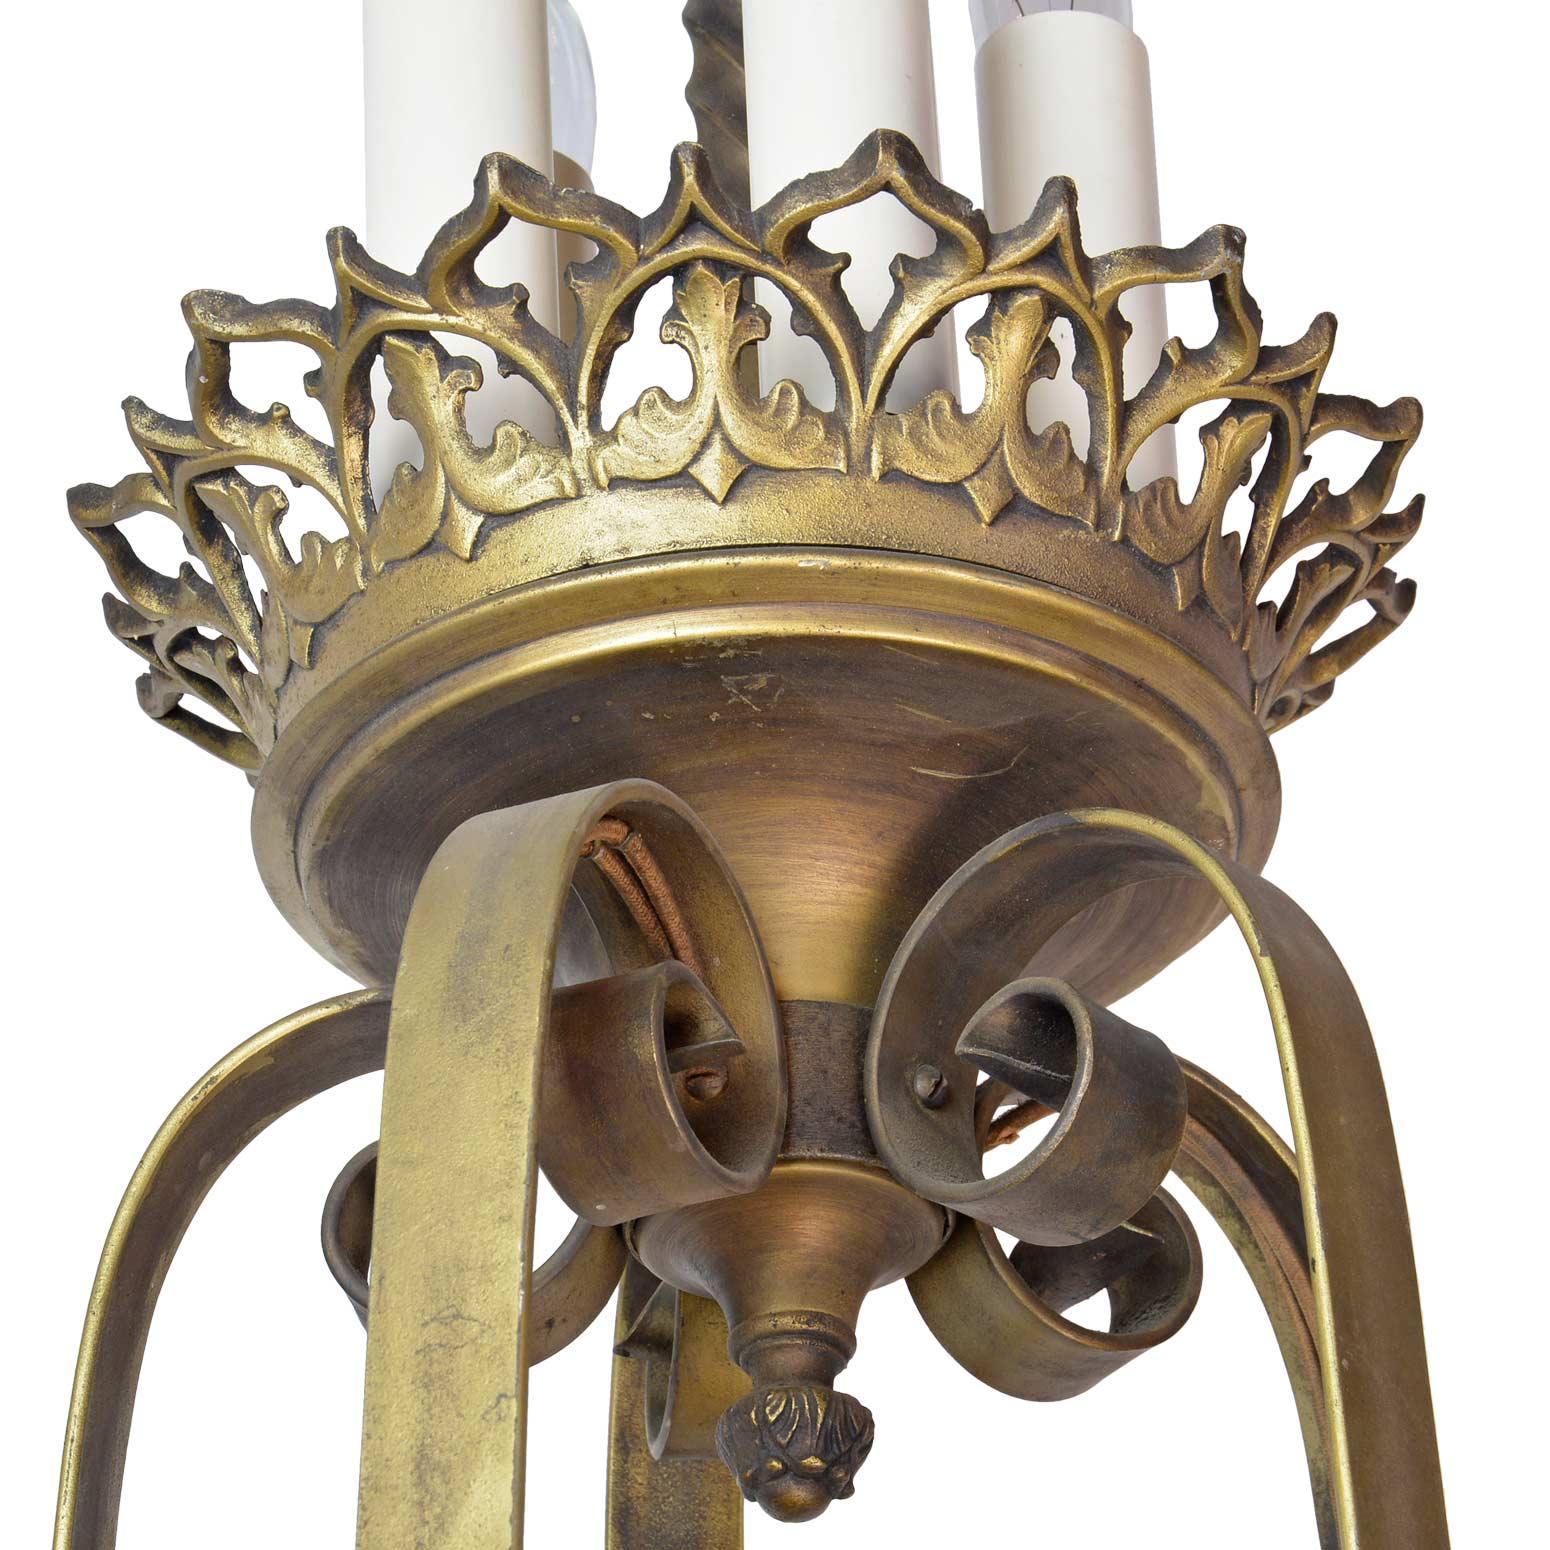 North American Gothic 20-Candle Tiered Chandelier